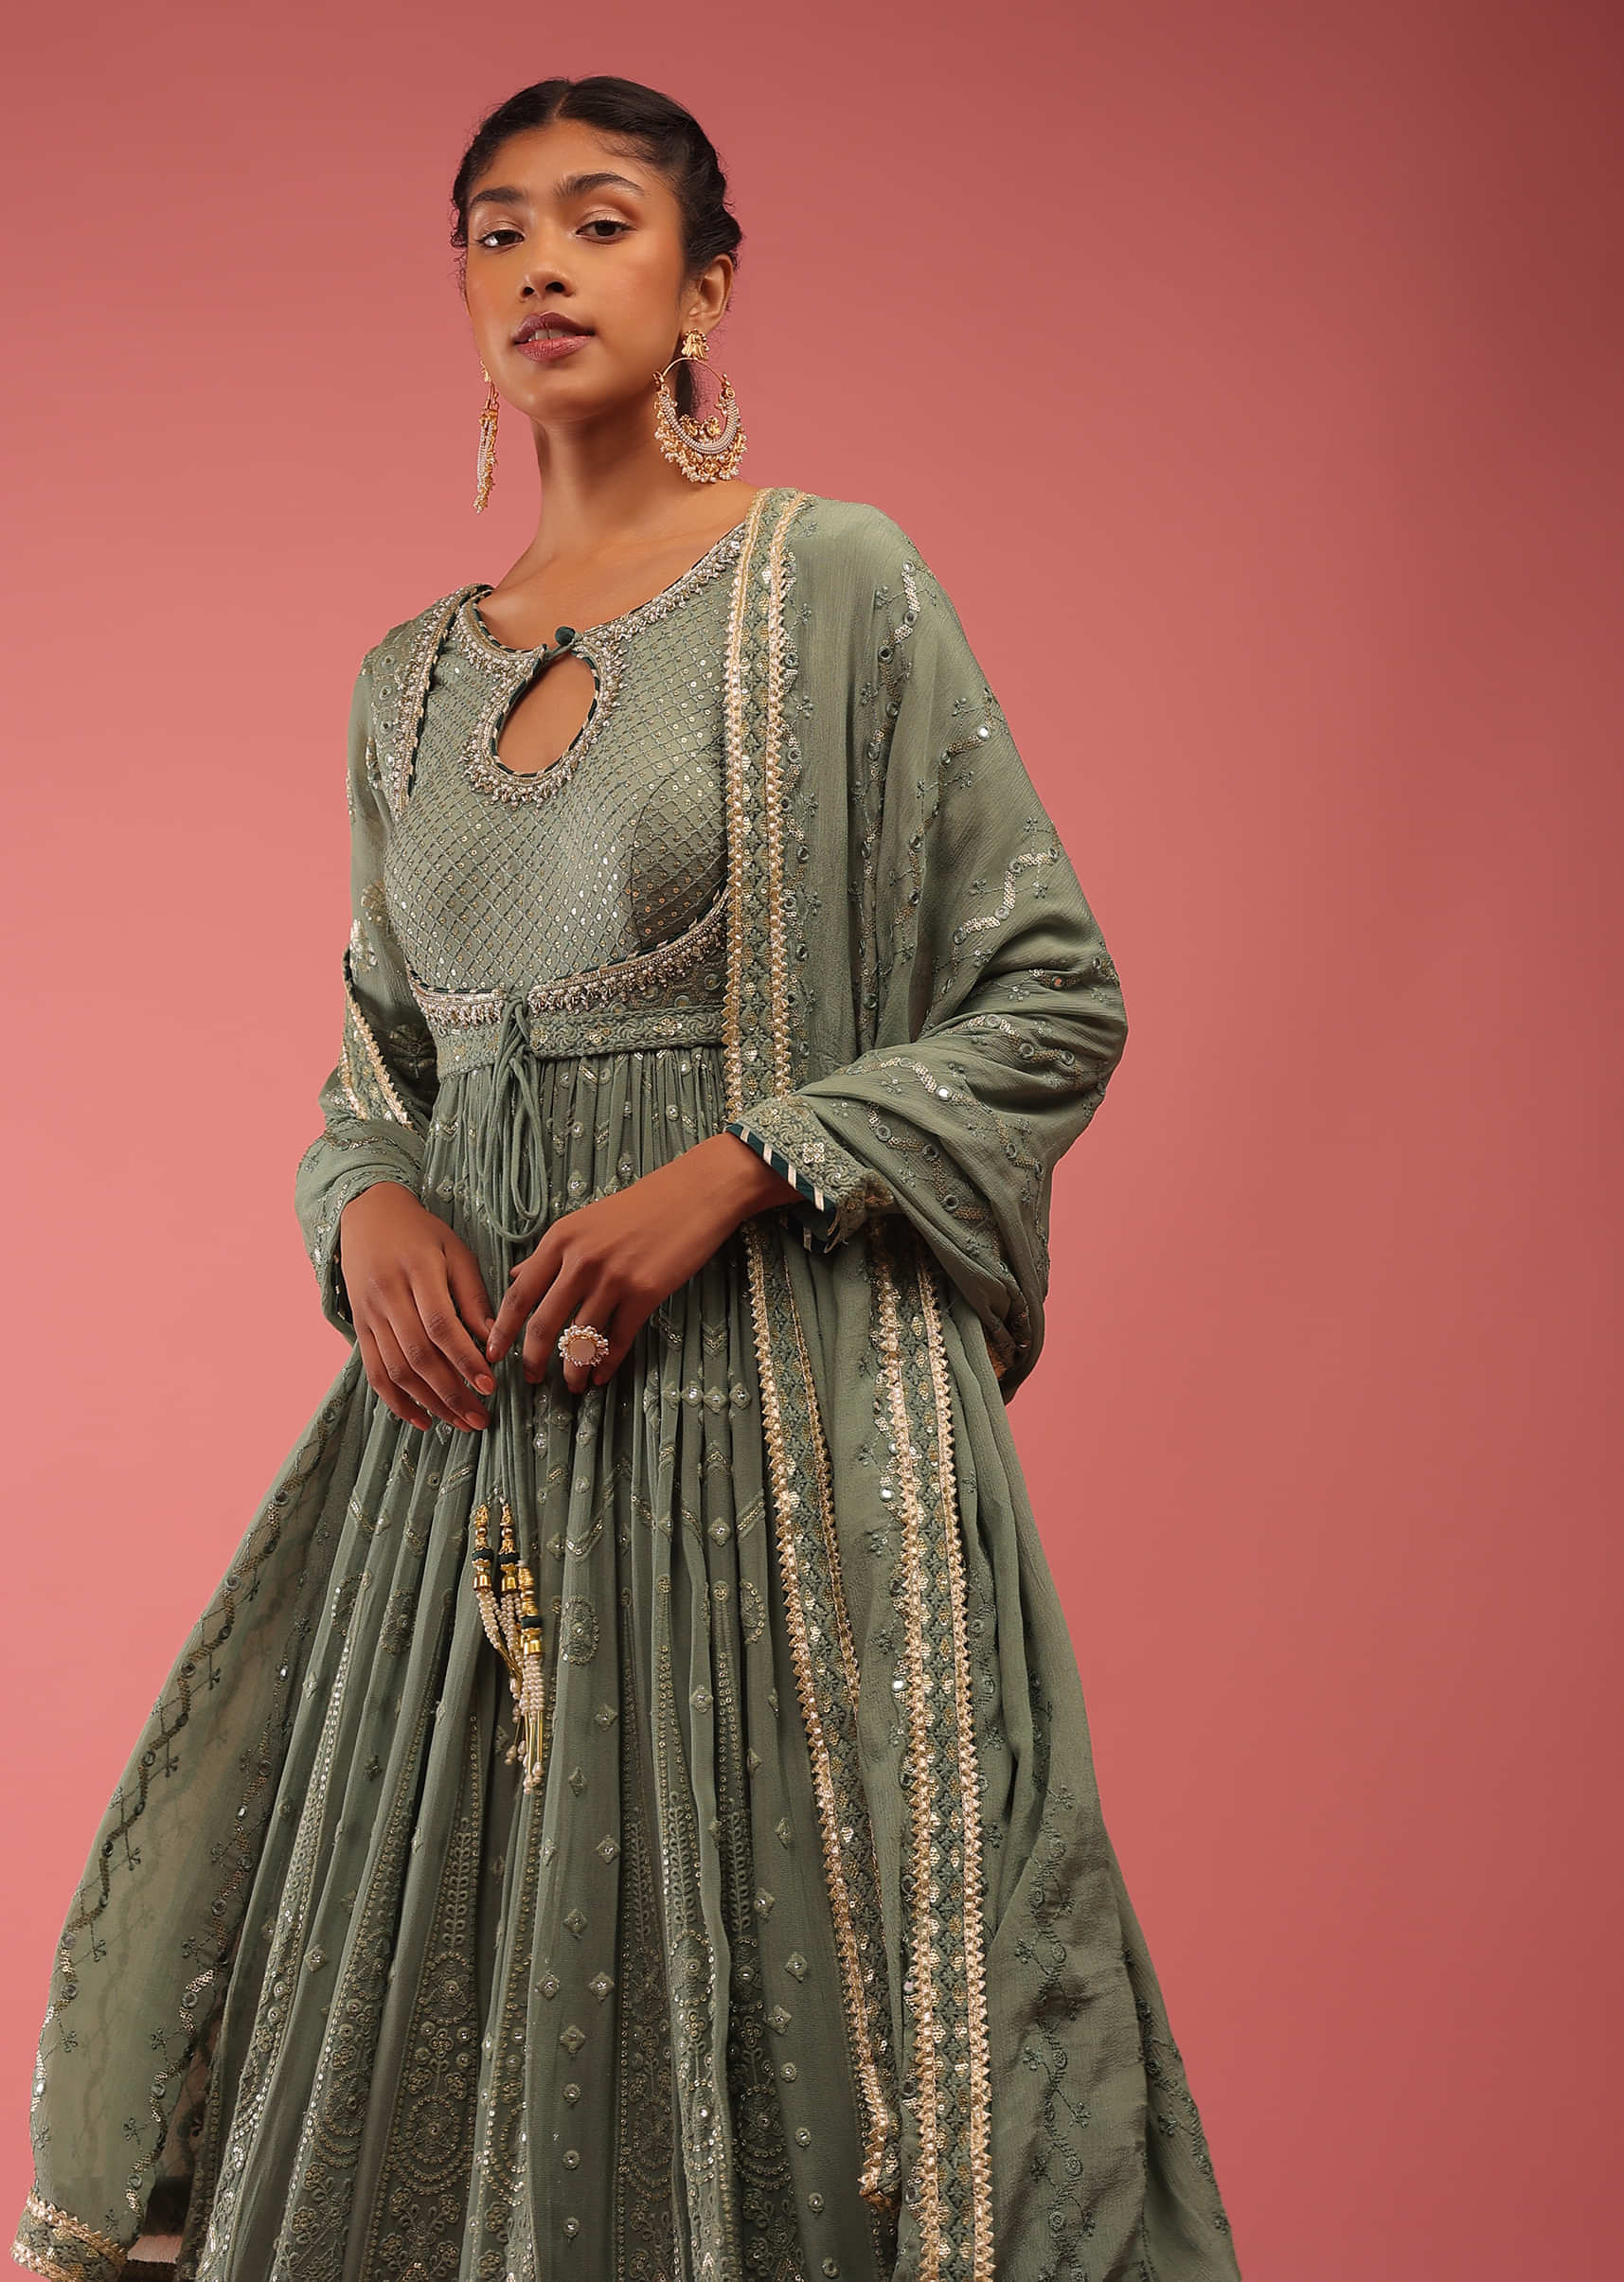 Oil Green Anarkali Suit In Lucknowi Embroidery In Kalidar Motifs, Crafted In Georgette With An Attachable Jacket In 3/4Th Sleeves